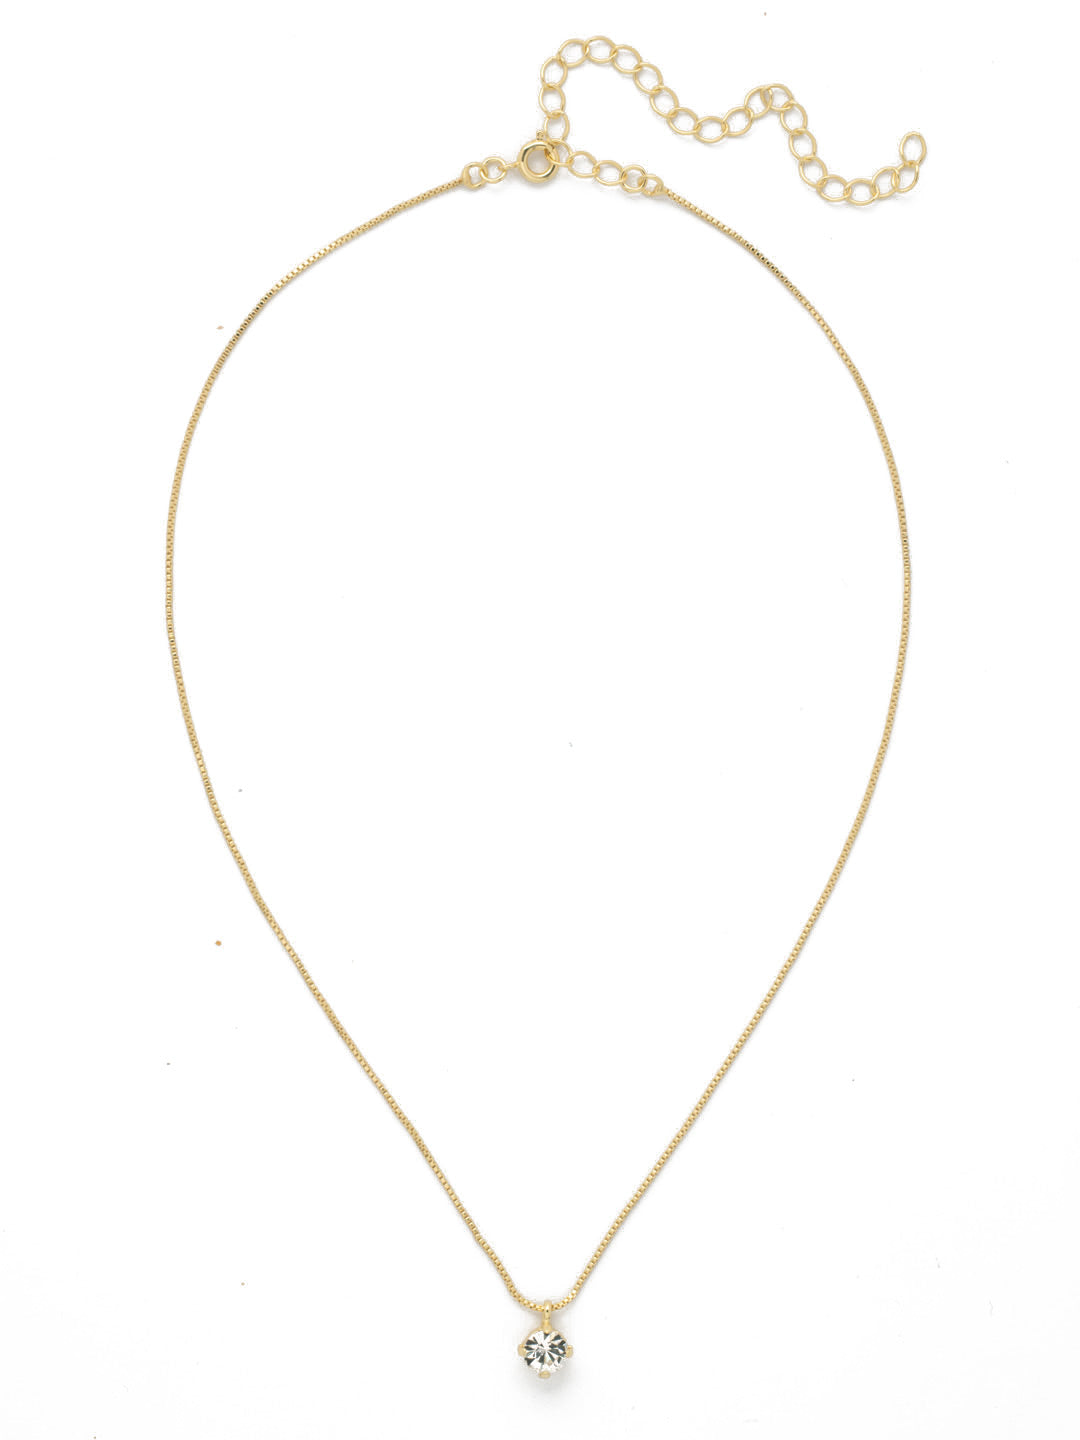 Aria Studded Pendant Necklace - NFL88BGCRY - <p>The Aria Studded Pendant Necklace features a single small round cut crystal dangling from a delicate chain, secured with a spring ring clasp. From Sorrelli's Crystal collection in our Bright Gold-tone finish.</p>